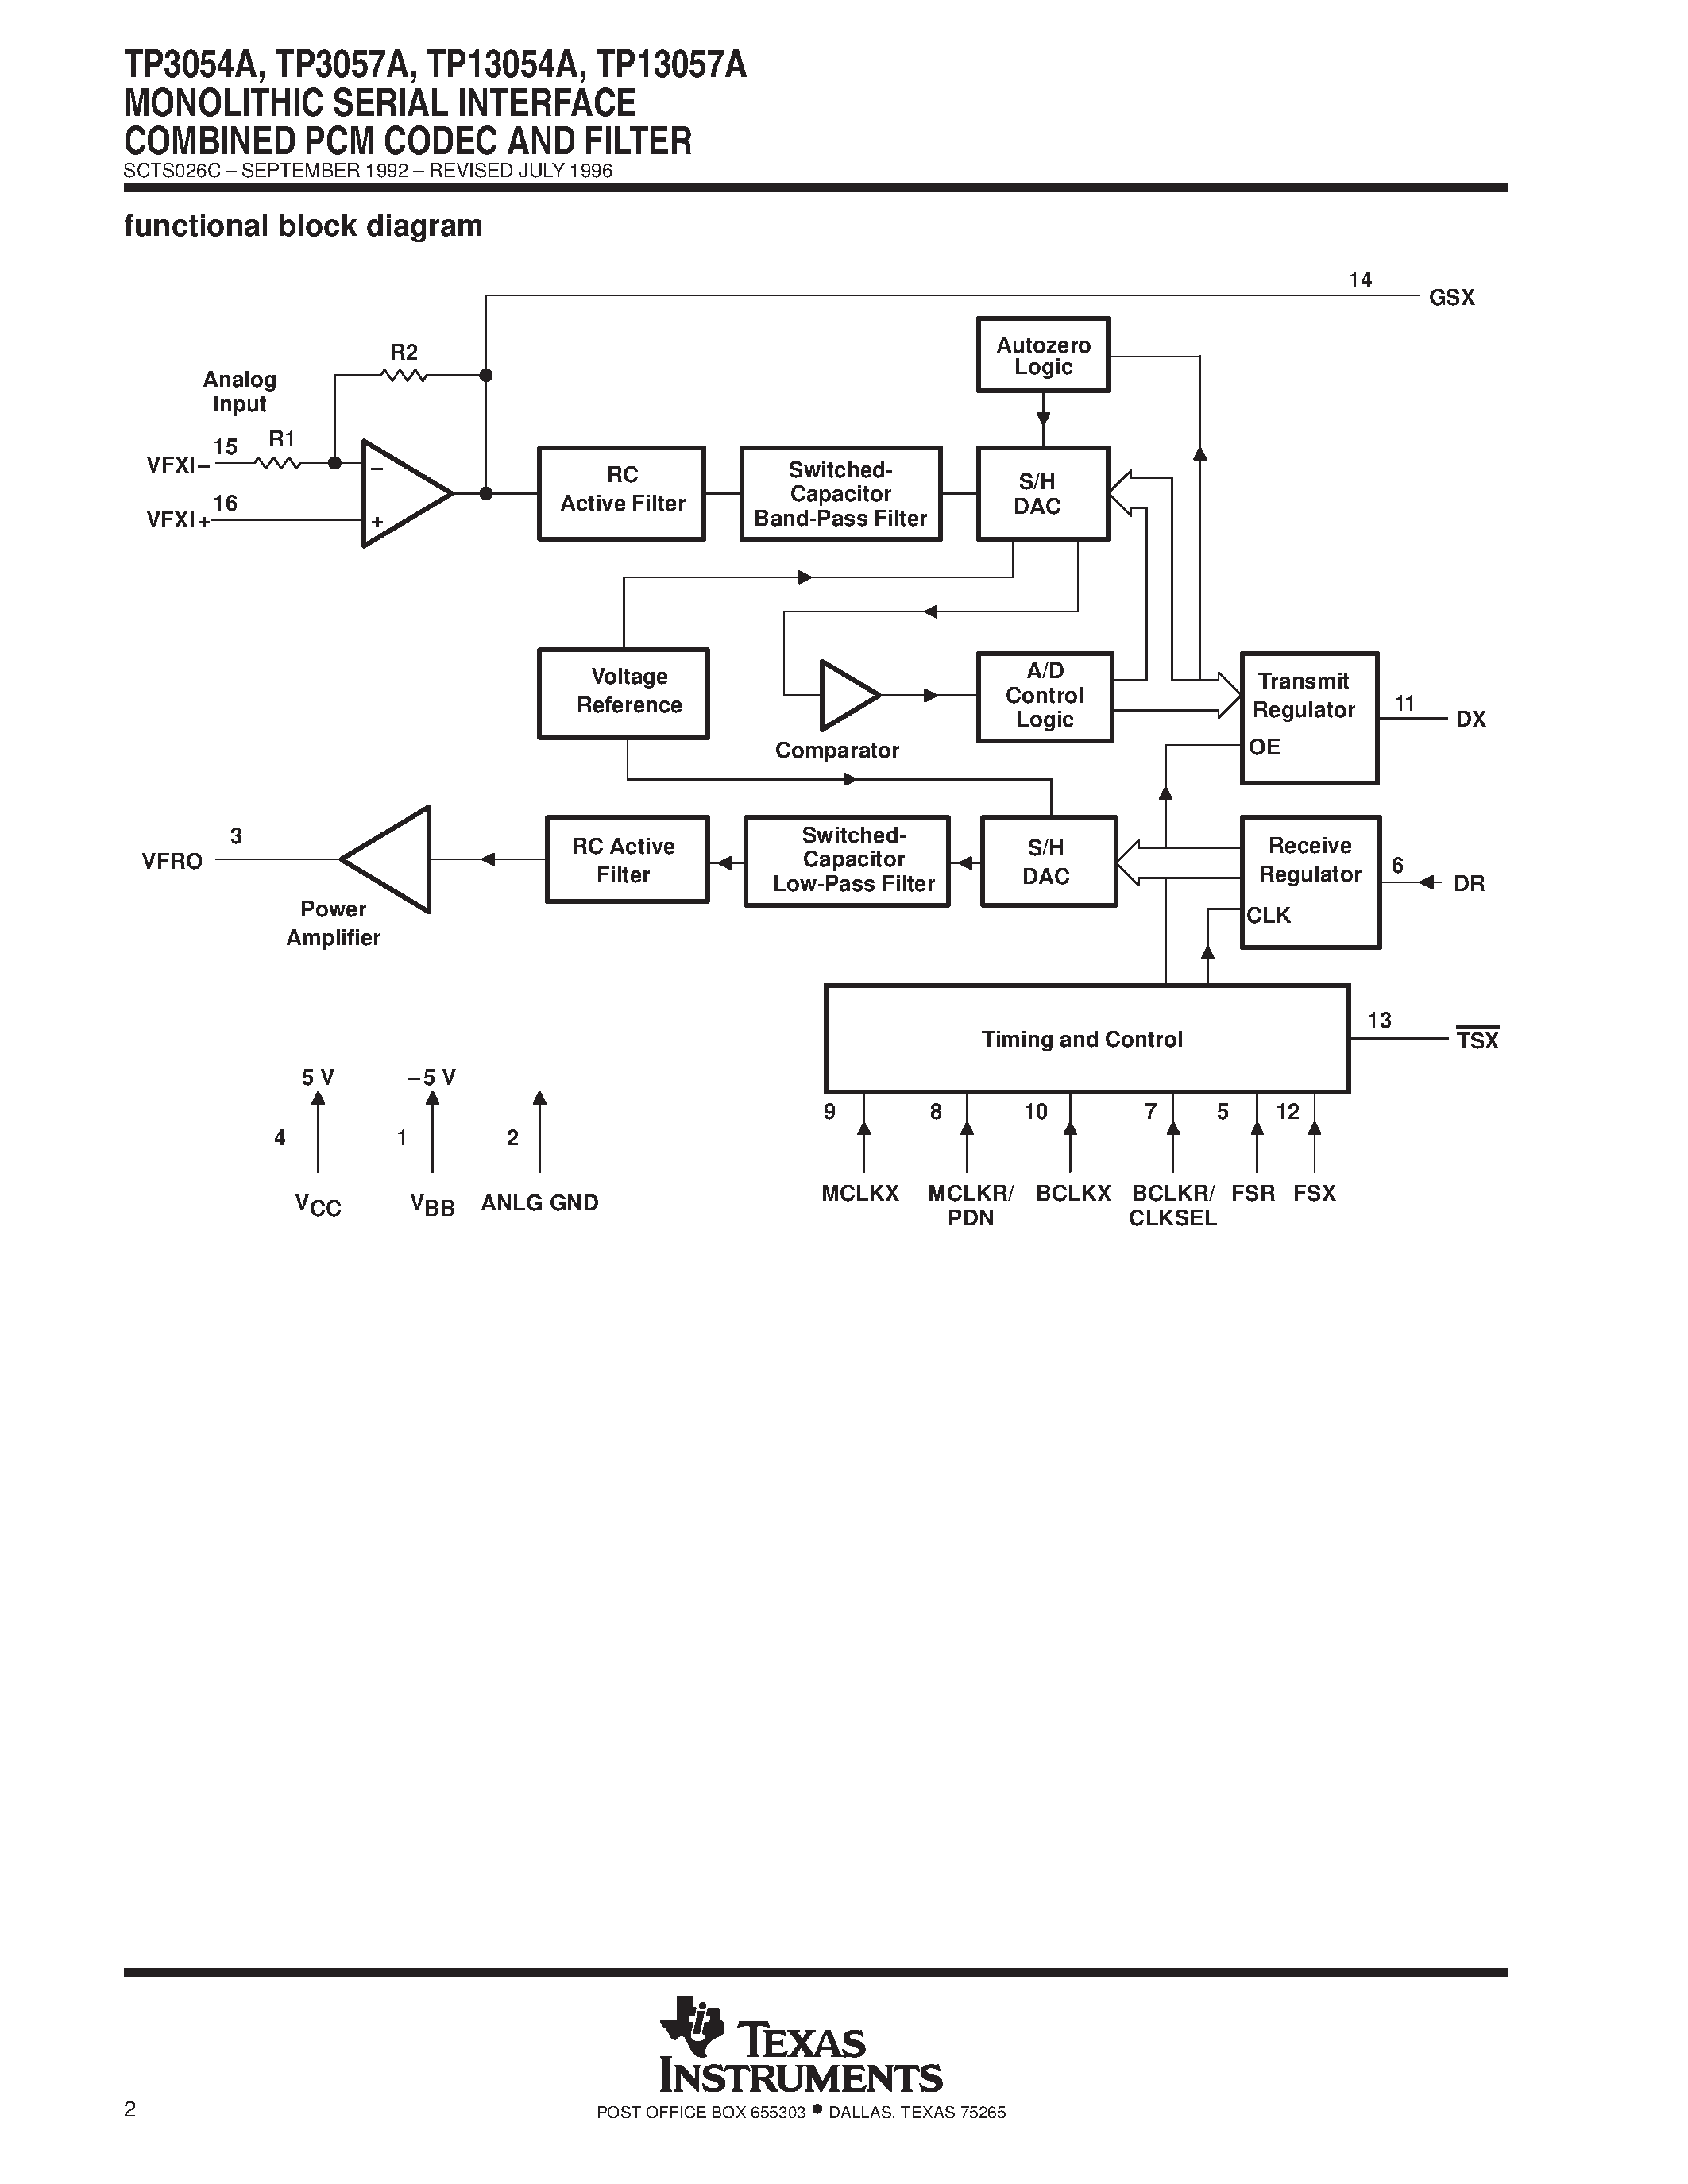 Datasheet TP13054ADW - MONOLITHIC SERIAL INTERFACE COMBINED PCM CODEC AND FILTER page 2